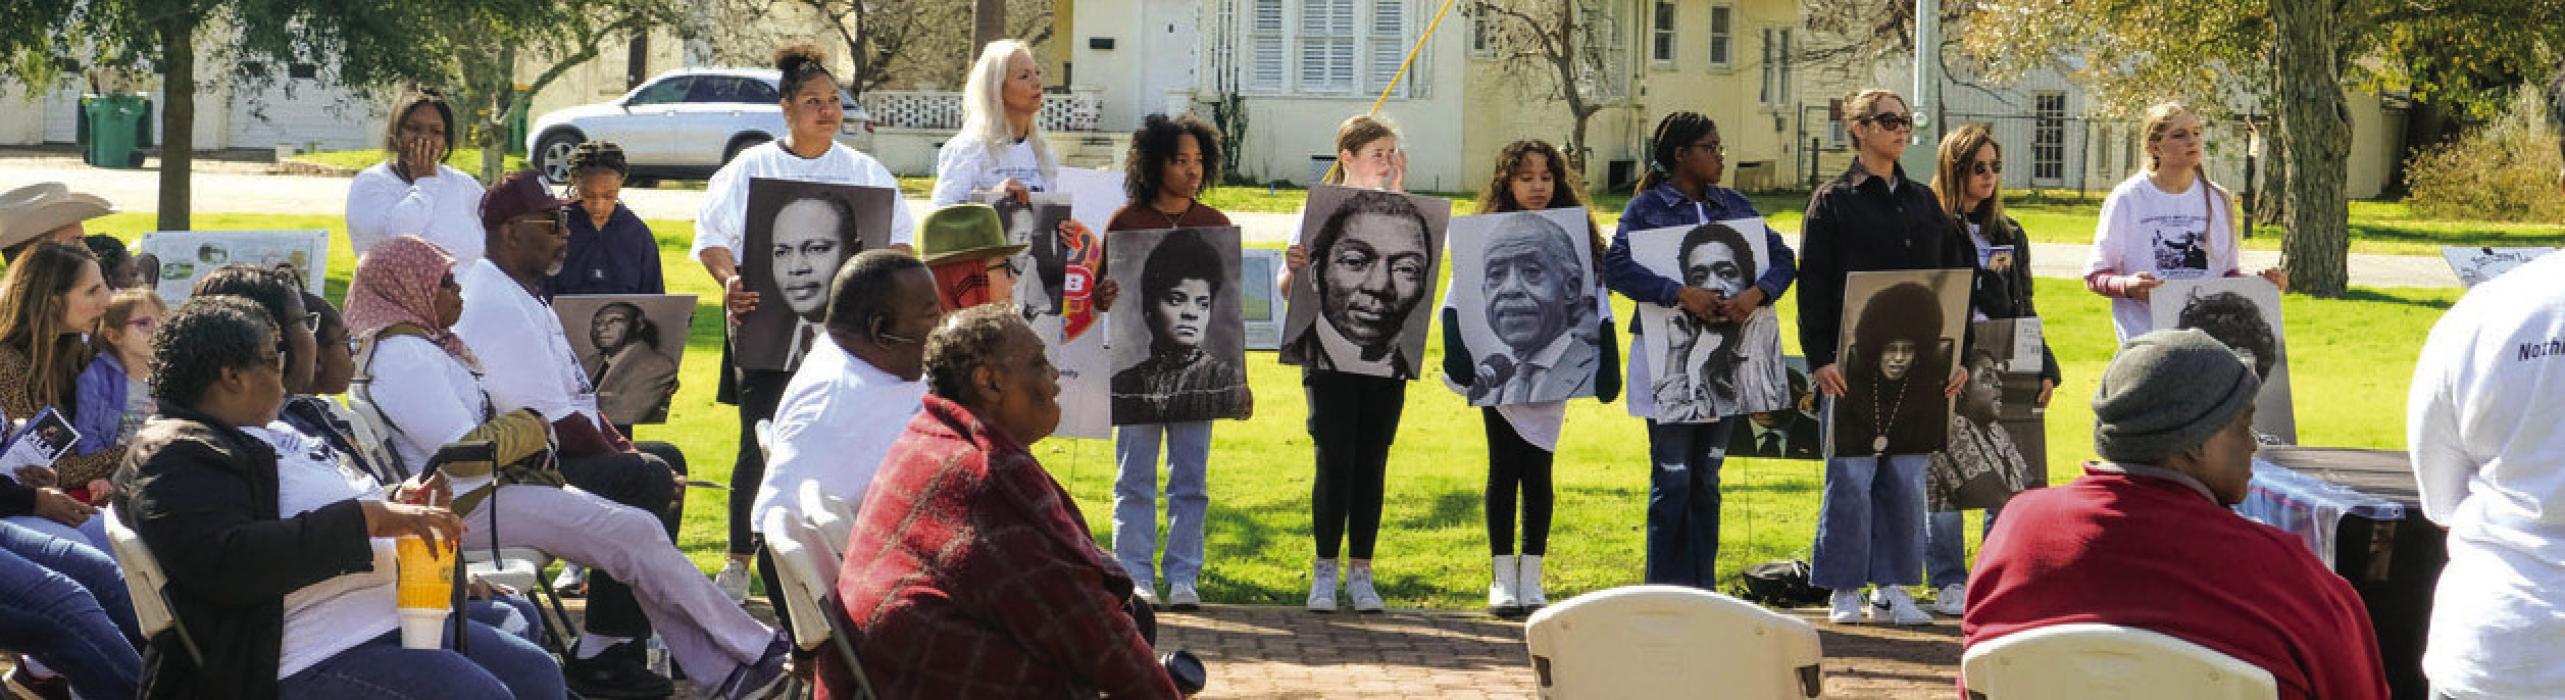 MLK’s Legacy Remembered in LG March